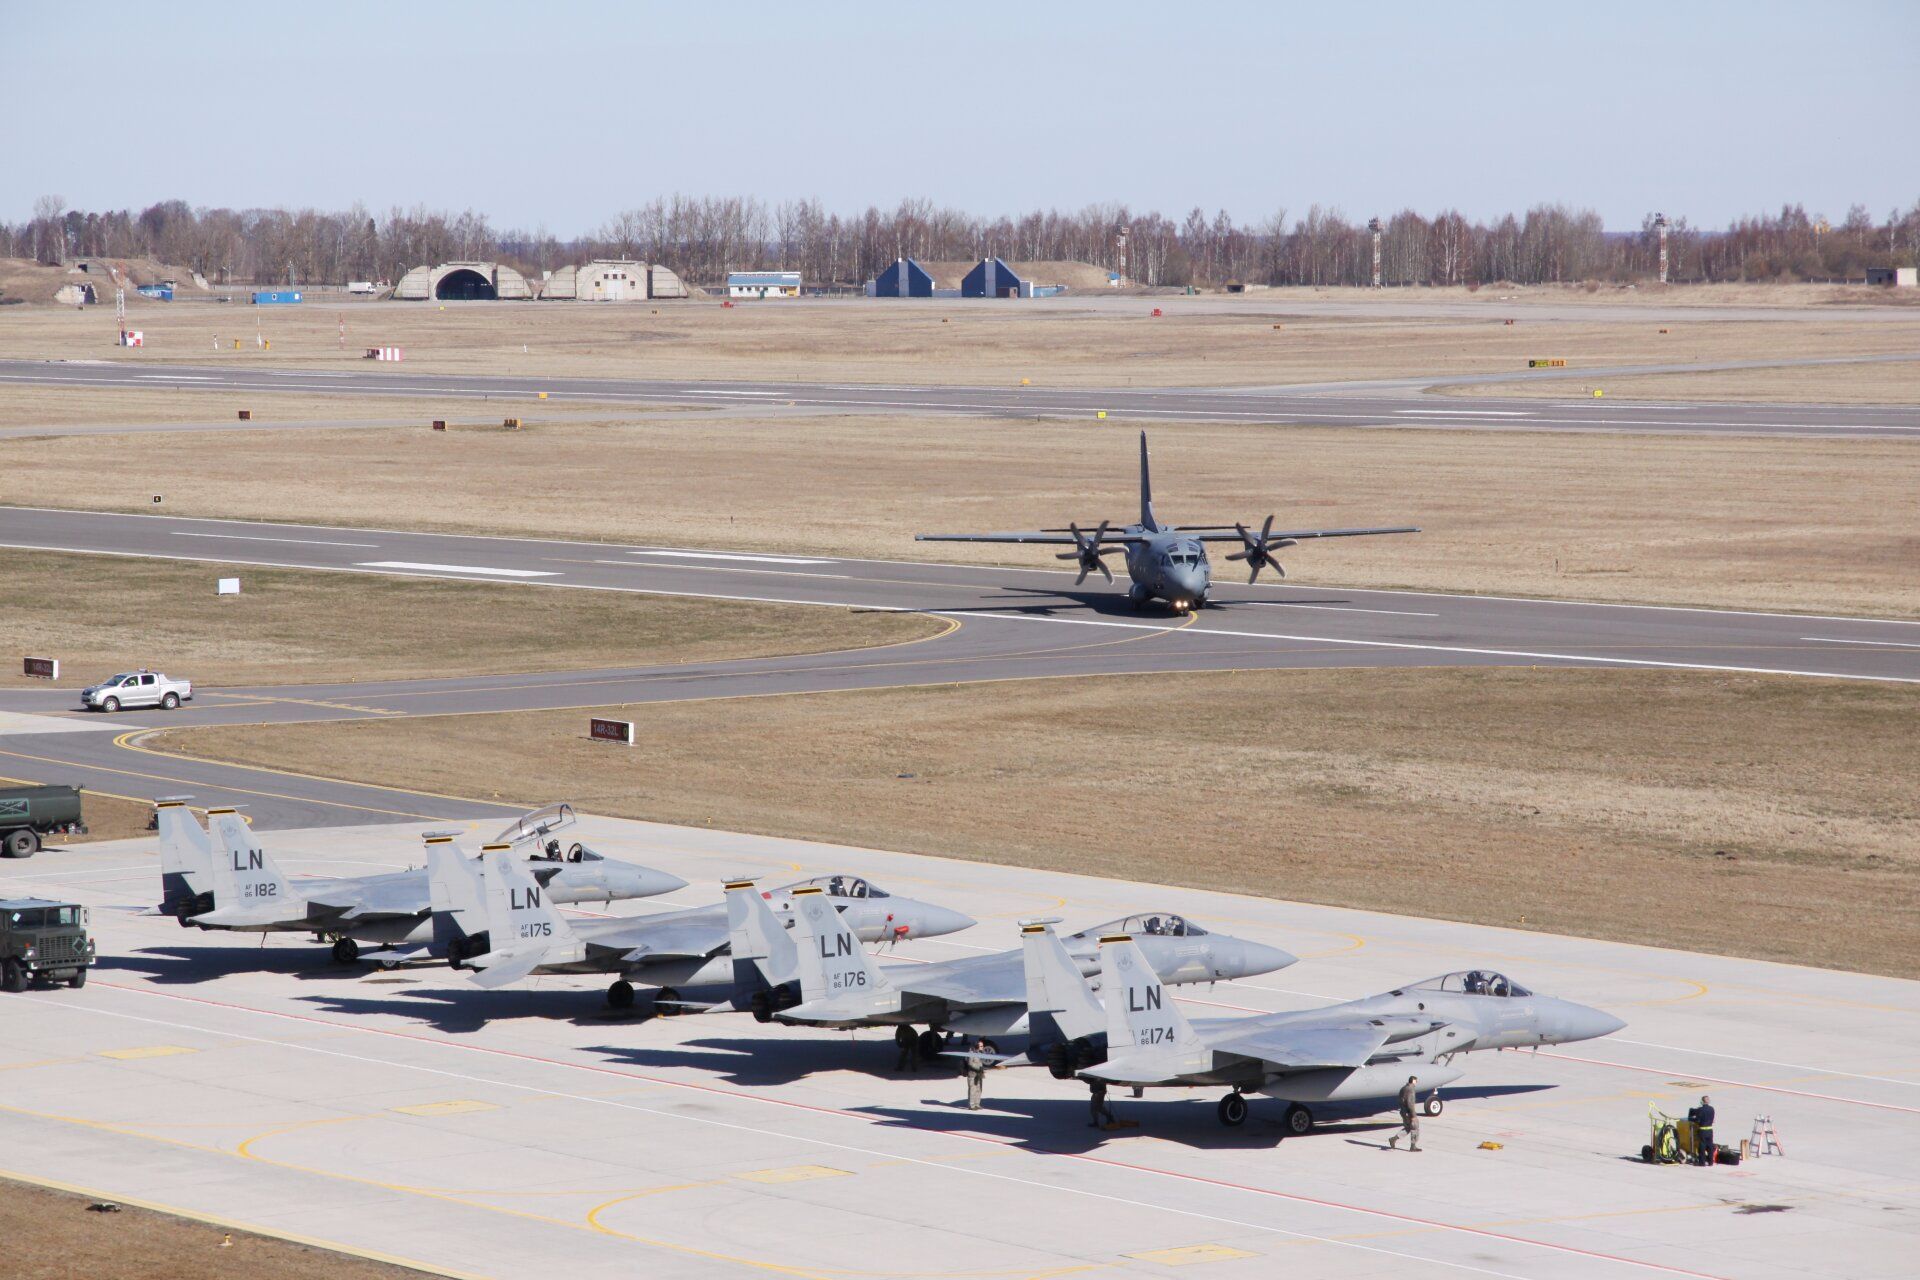 A LTAF Alenia C-27J Spartan and several fighter jets on a military airport apron.